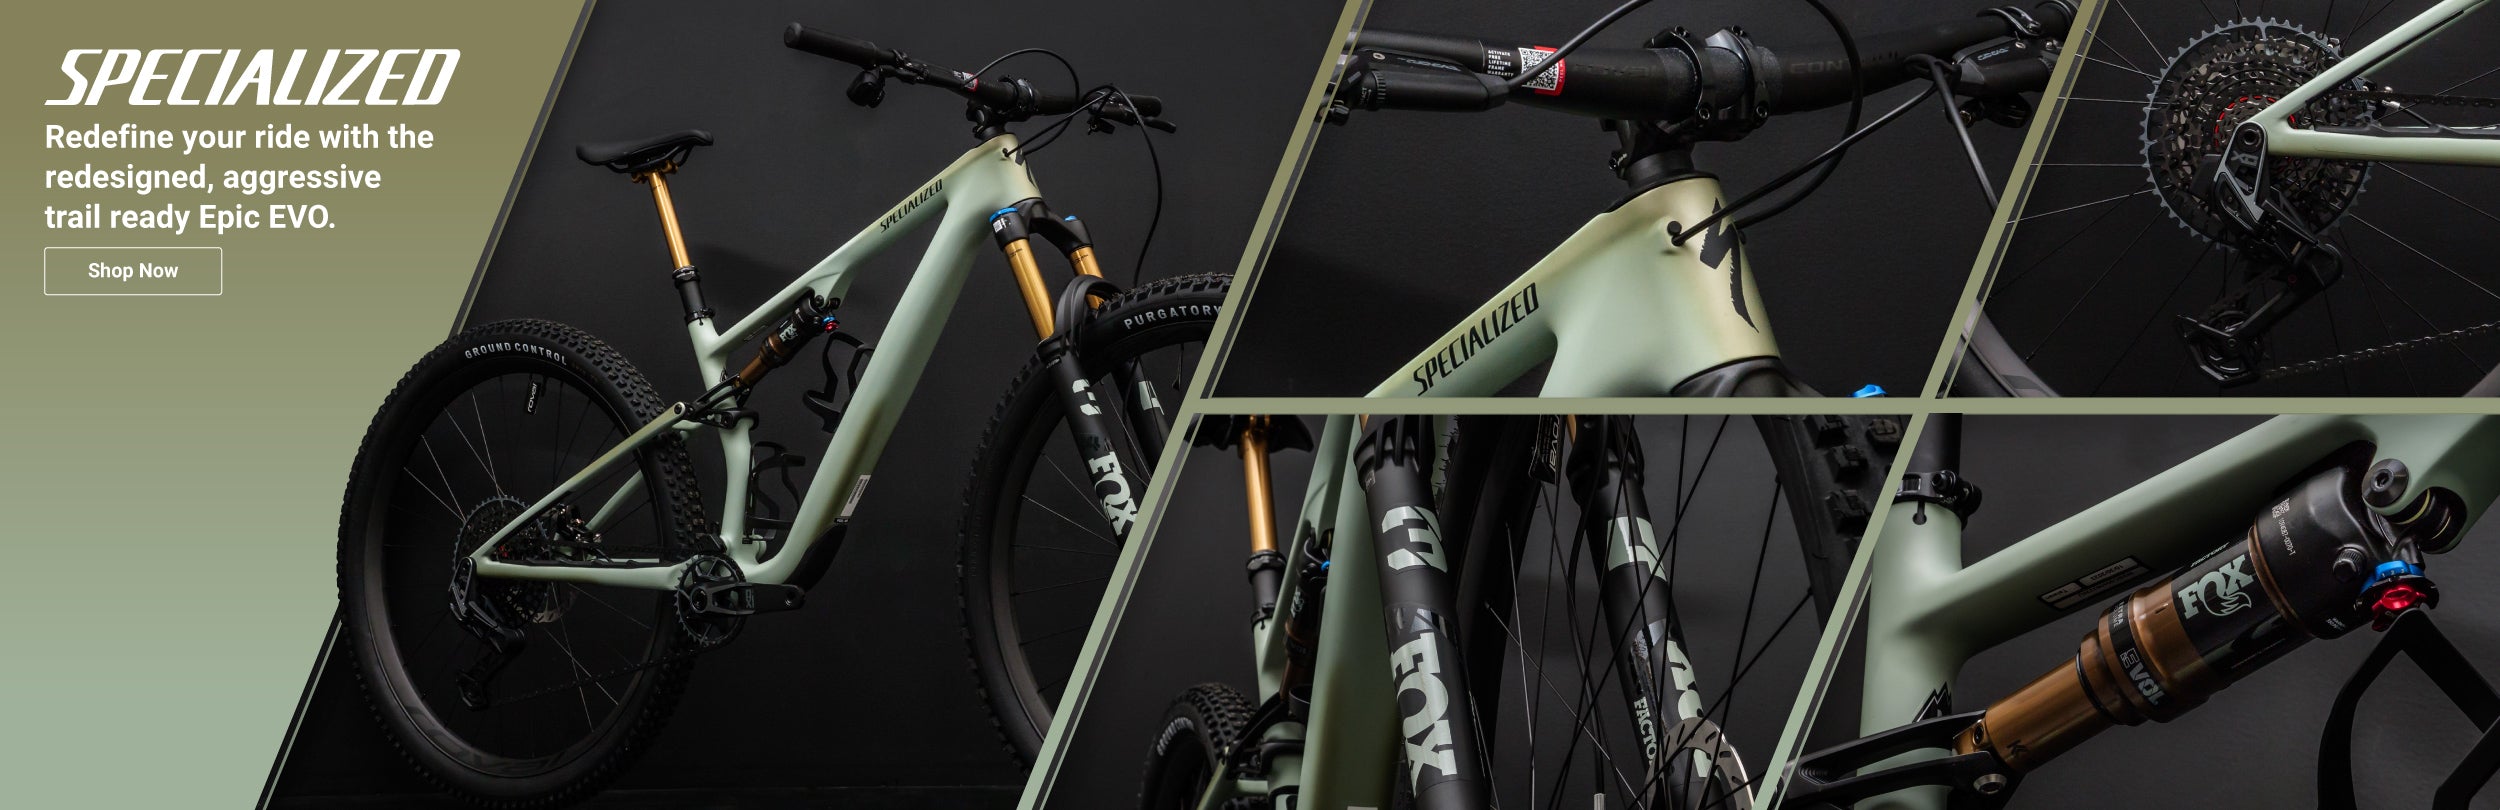 The redesigned Specialized Epic EVO is here